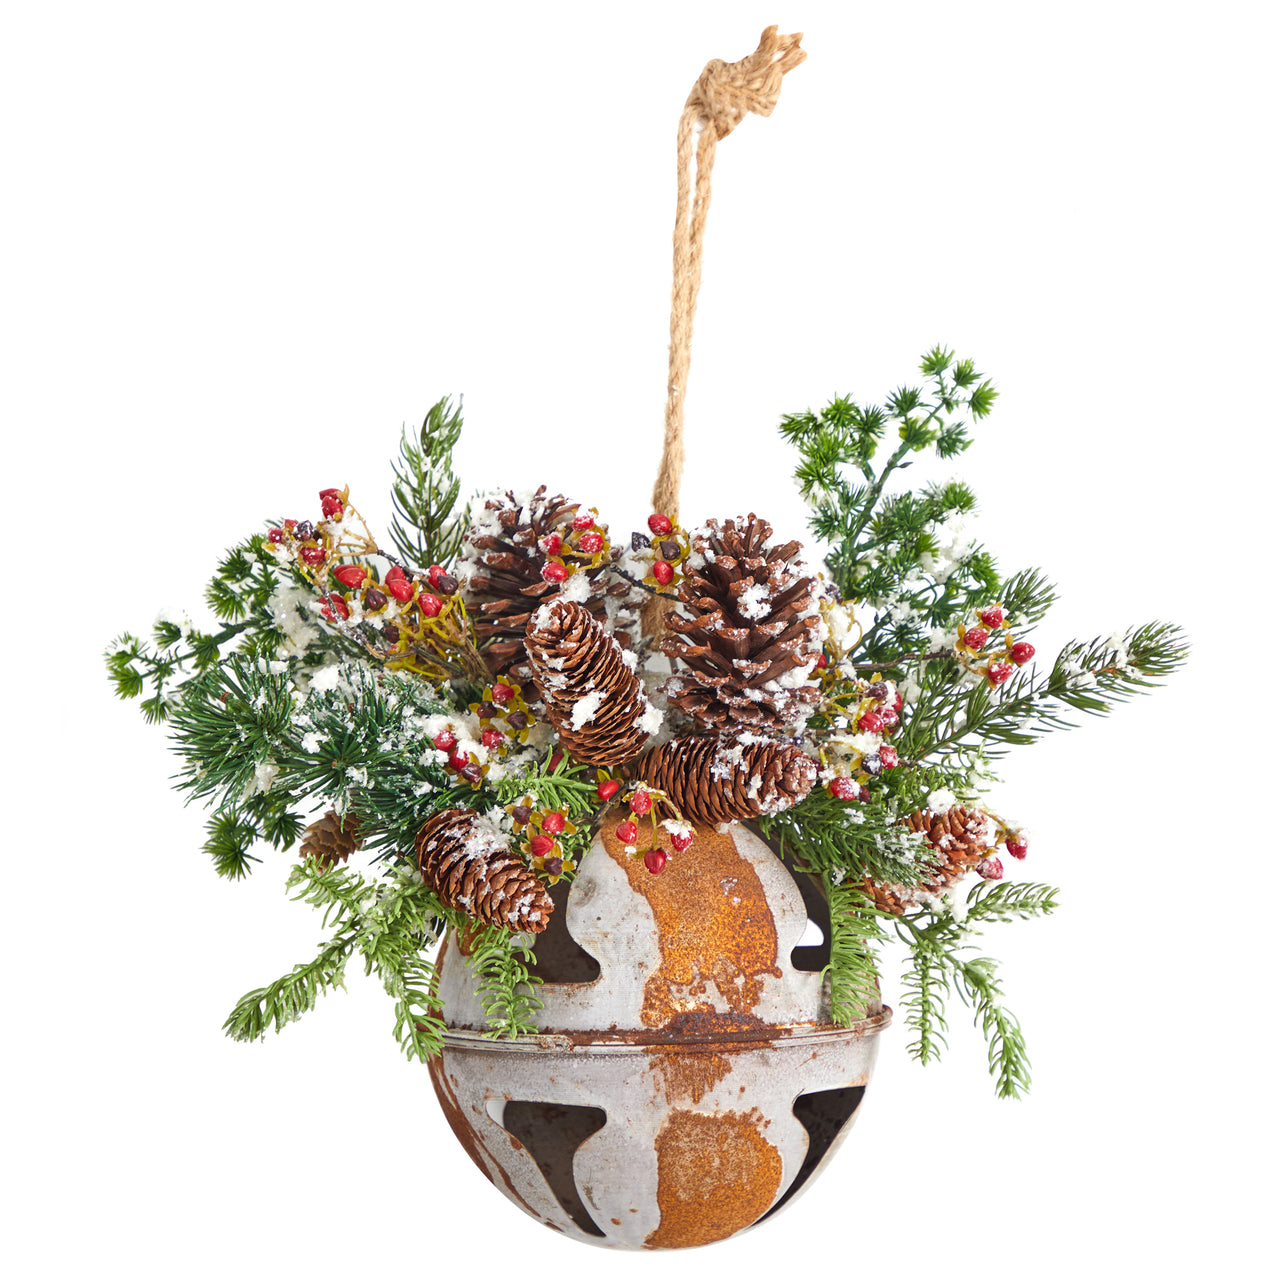 16” Holiday Christmas Jumbo Metal Bell Ornament With Artificial Holly, Berries And Pine